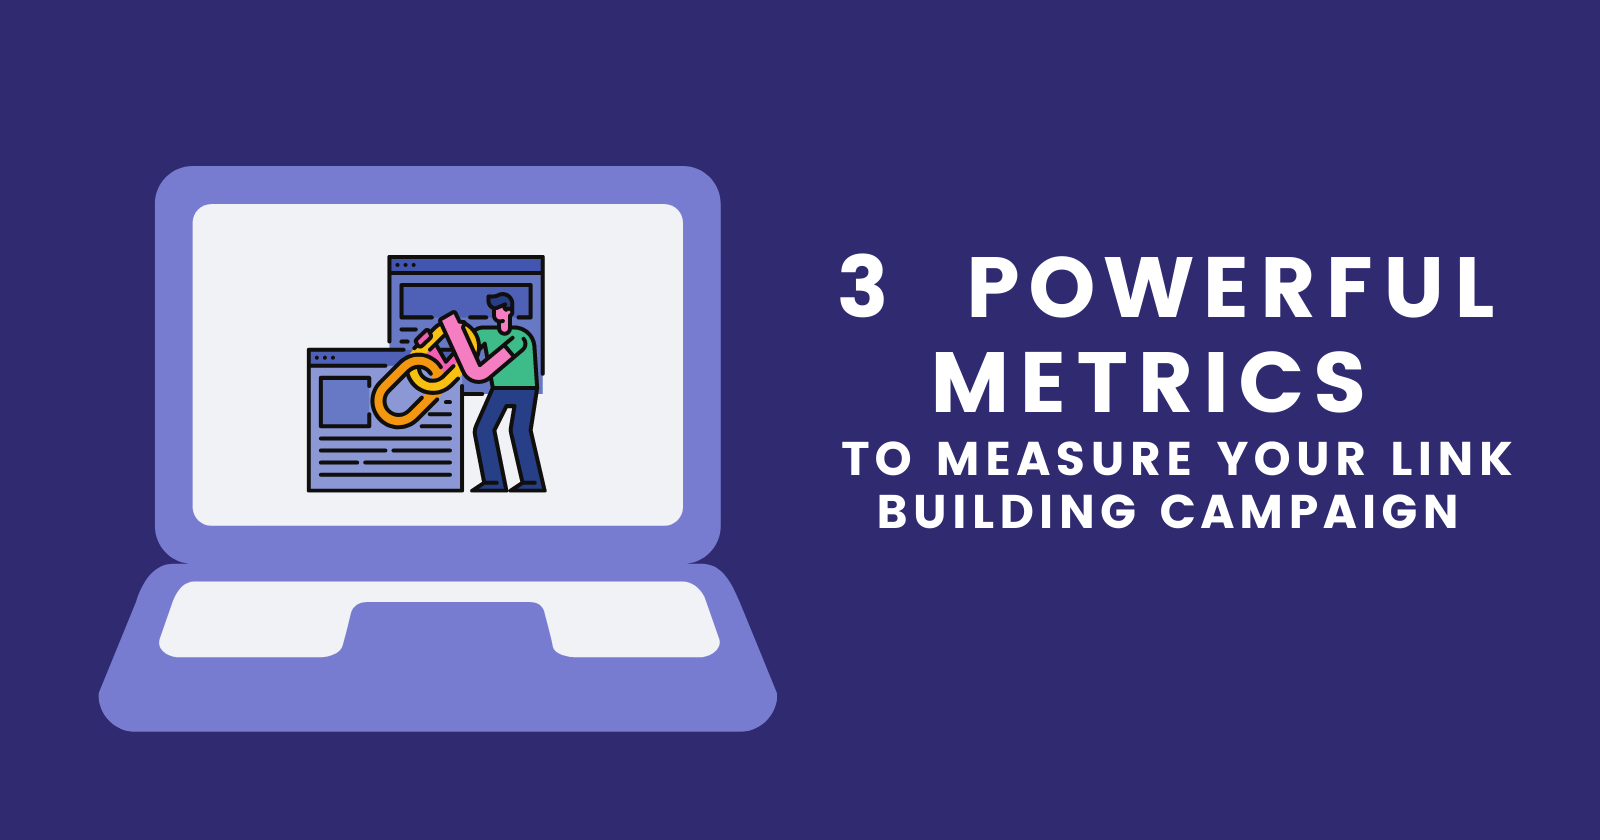 3-powerful-metrics-to-measure-your-link-building-campaign-5eb01a06bfb58.png